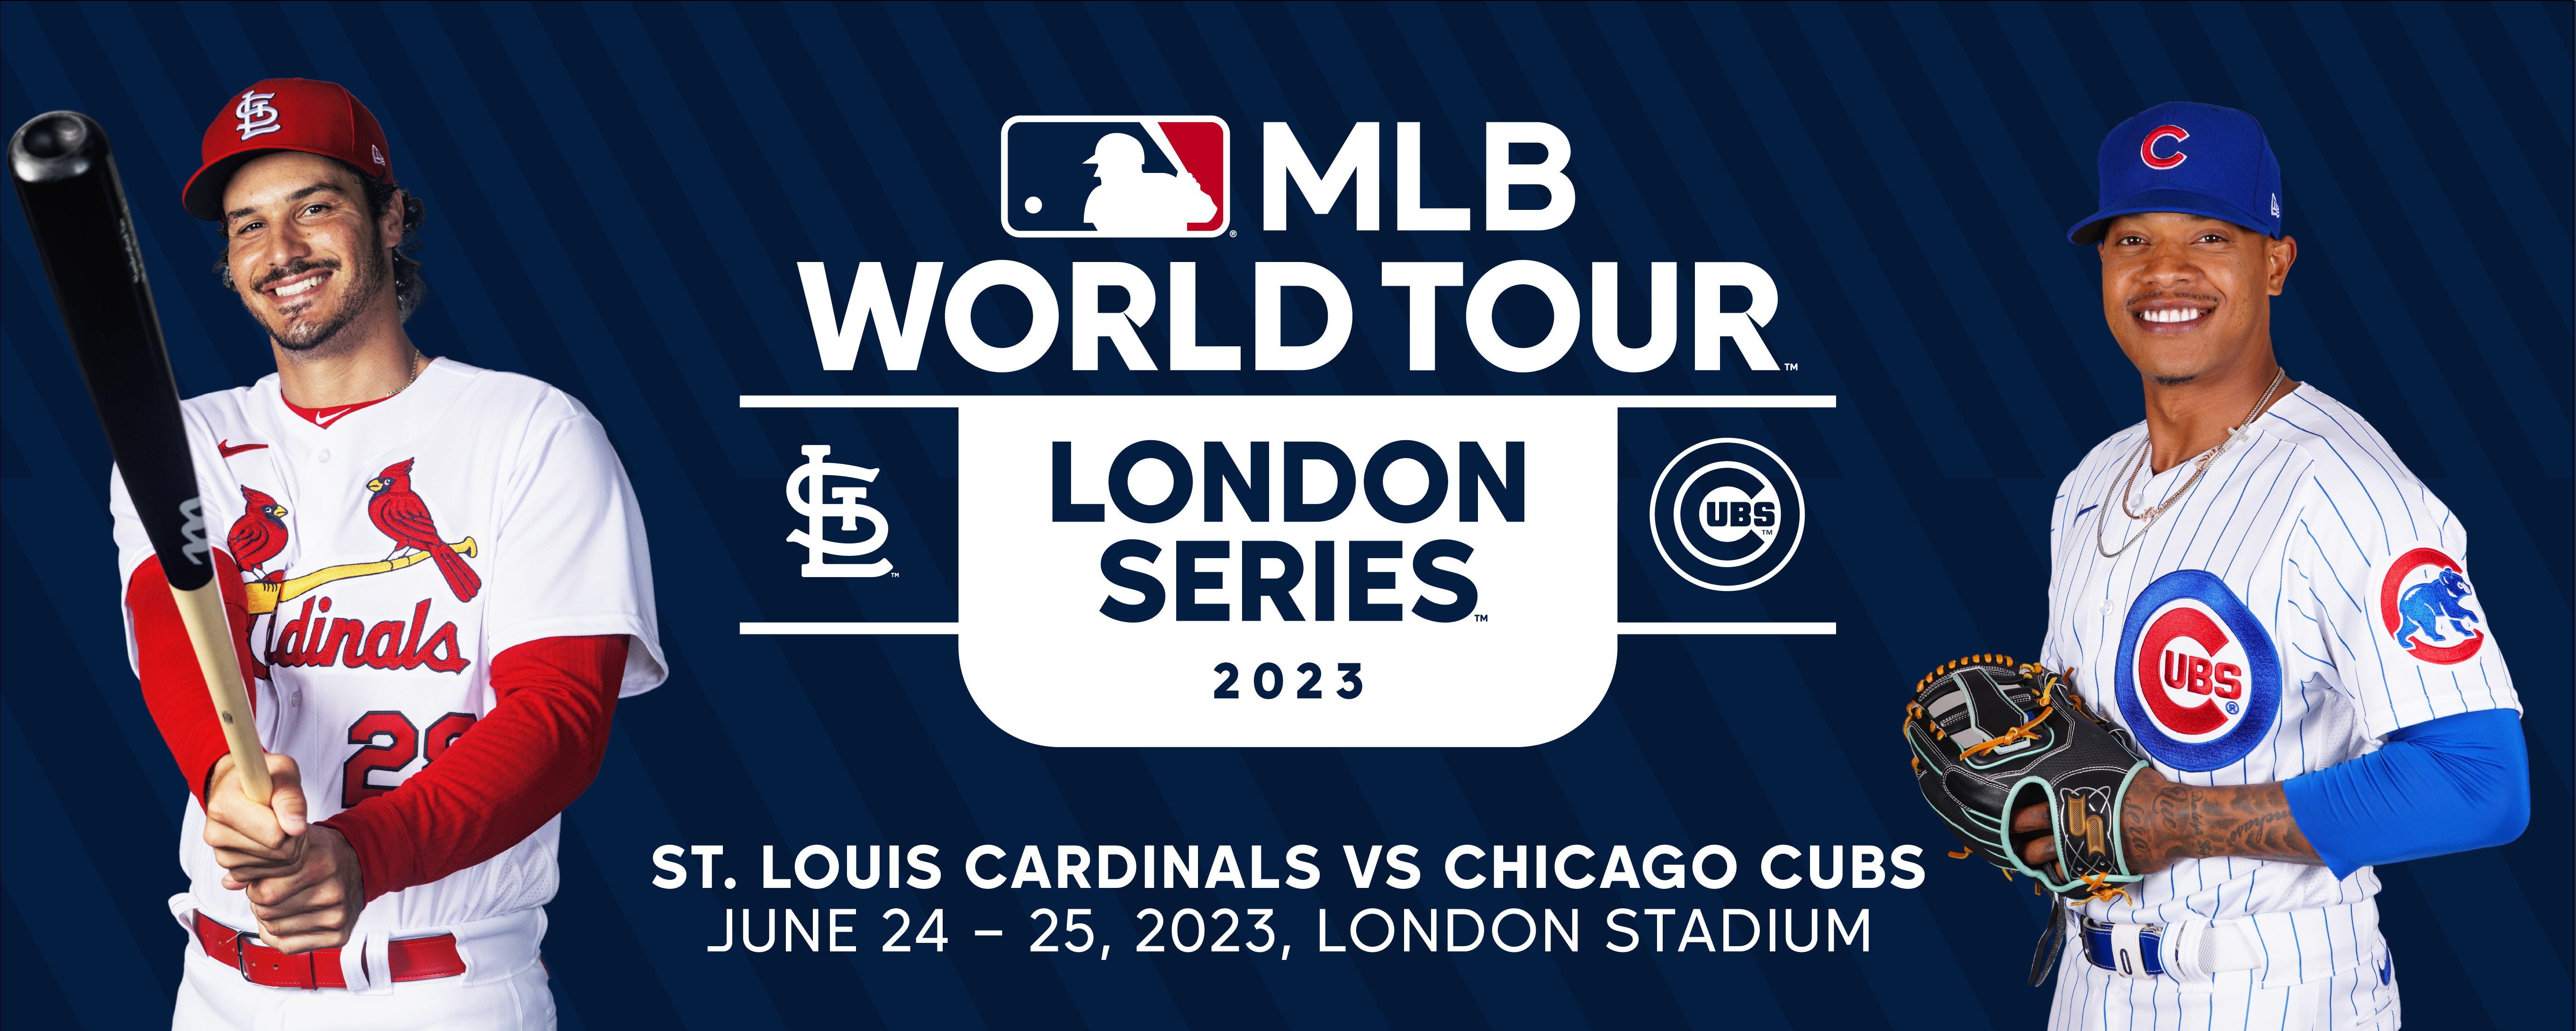 CARDINALS AND CUBS TO PLAY IN MLB LONDON SERIES 2023, PART OF NEW MLB WORLD  TOUR